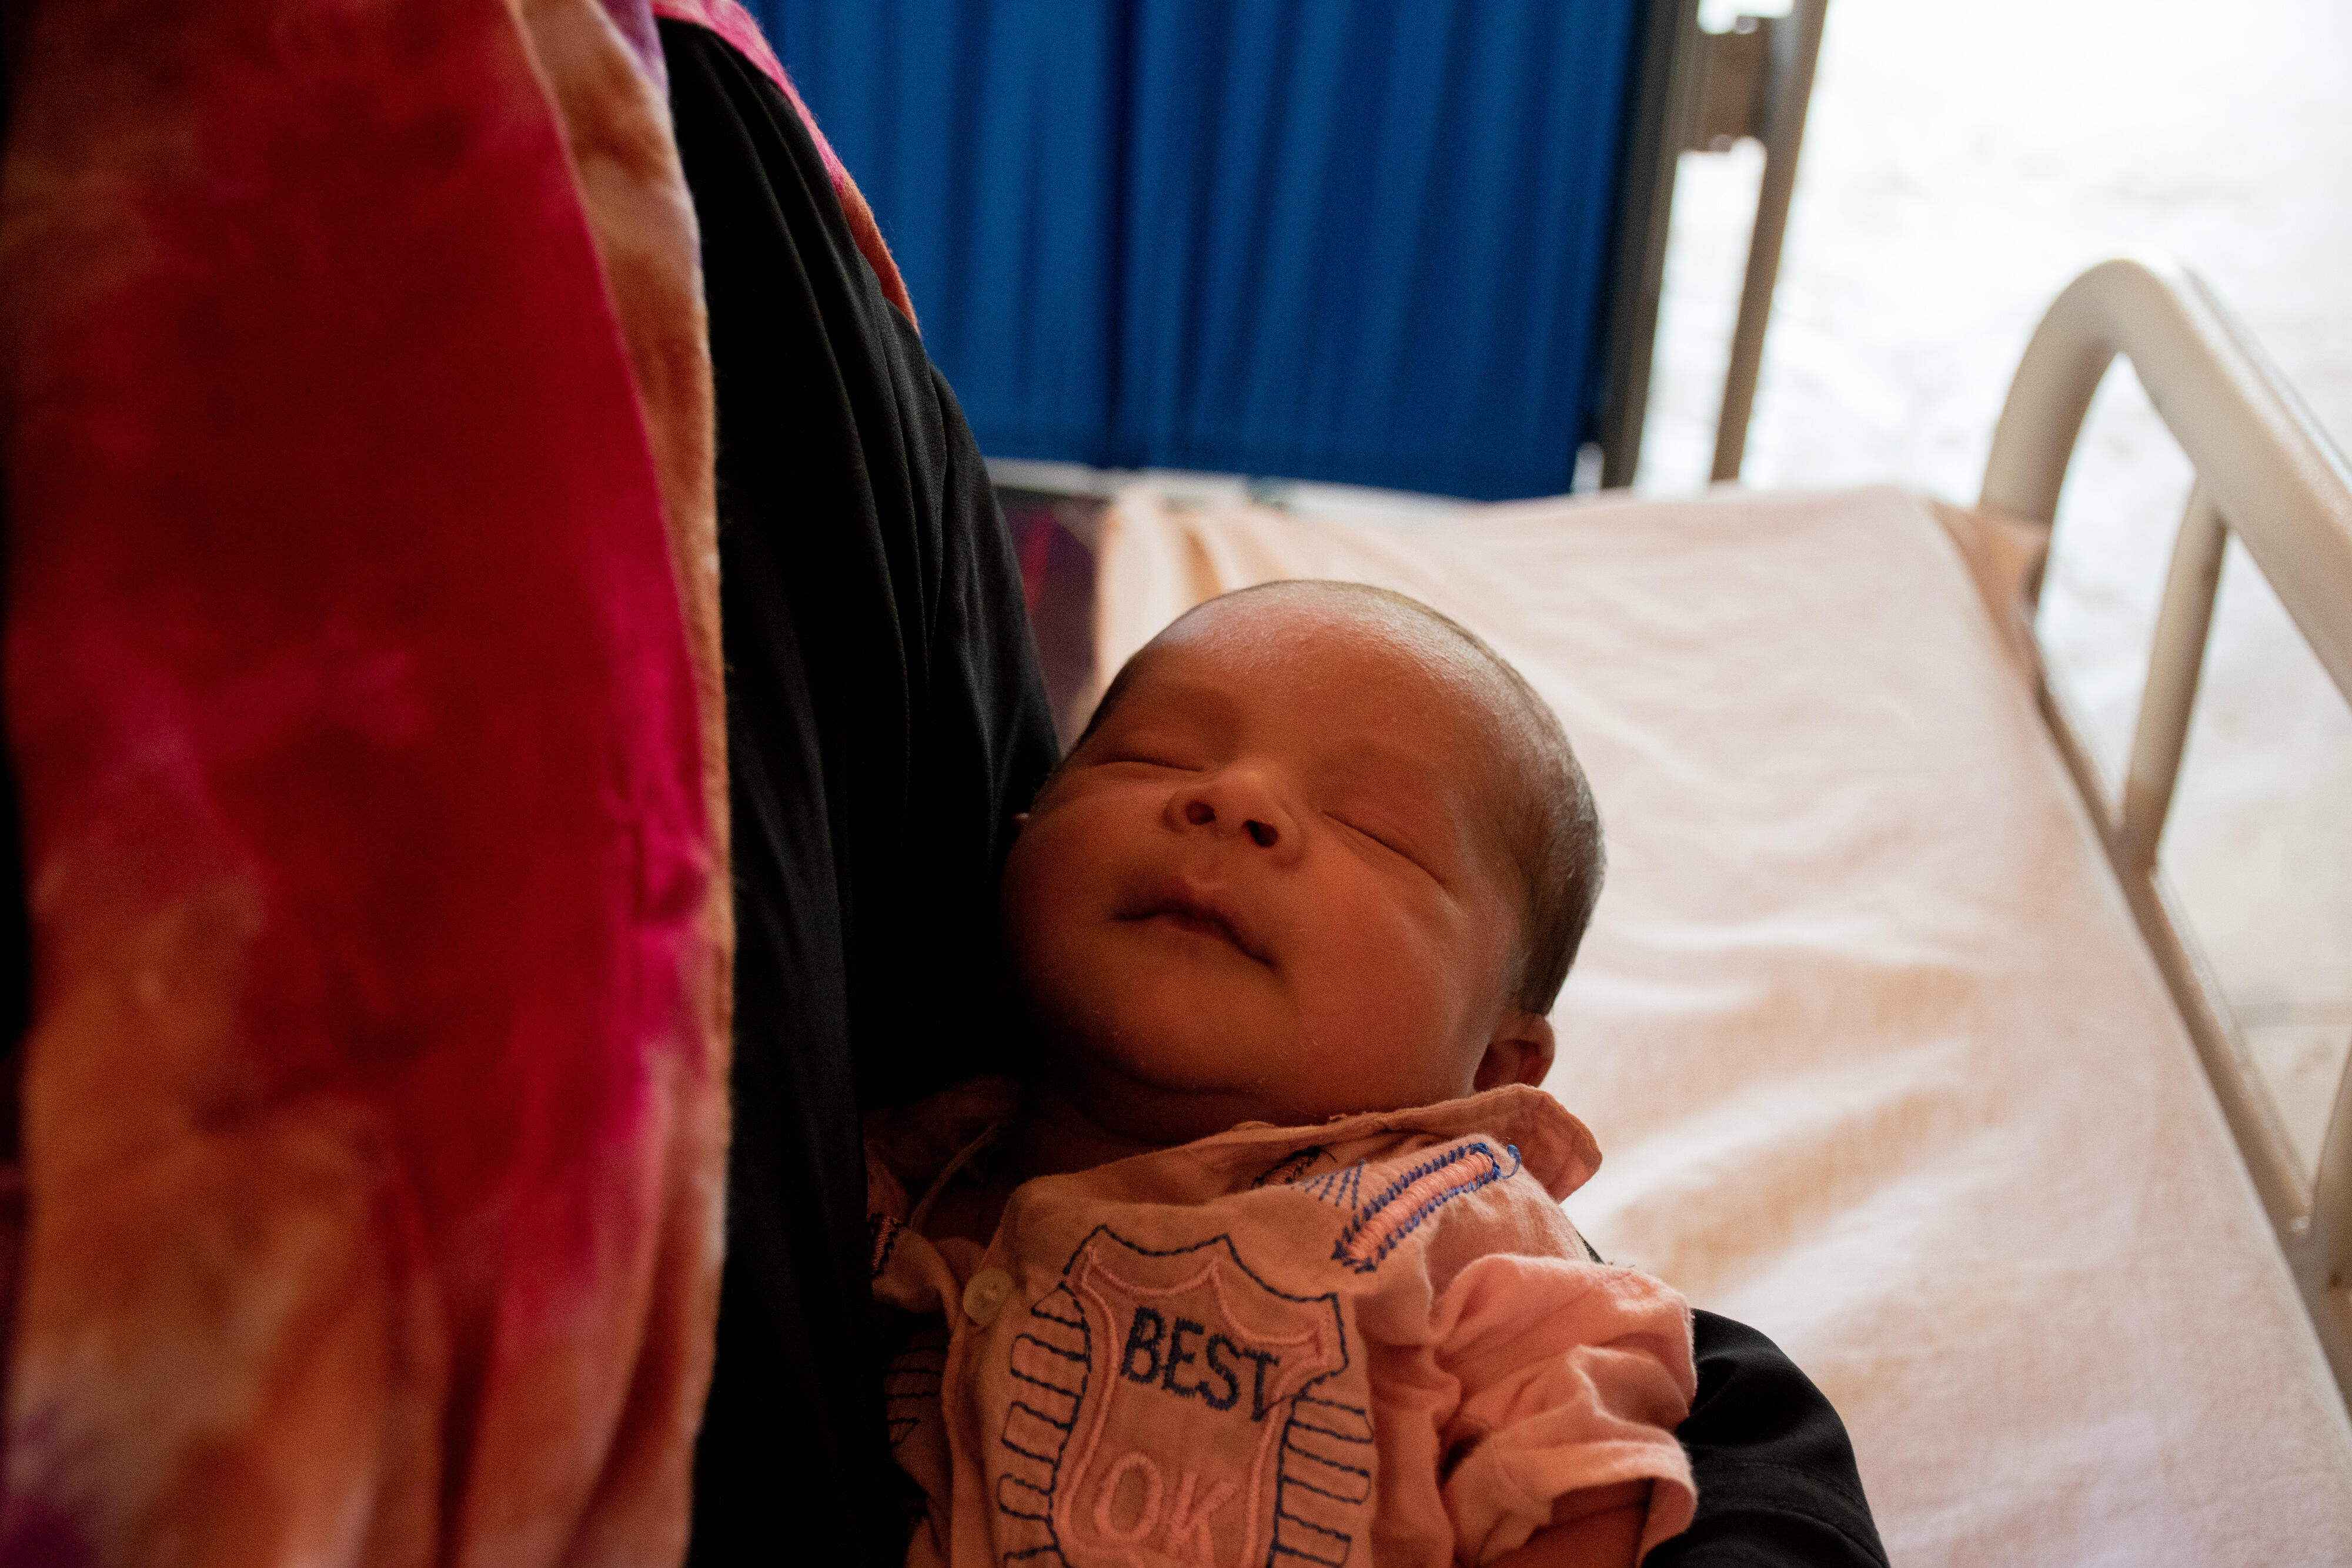 A four-day-old Rohingya boy in his mother's arms at an IRC health center in Bangladesh